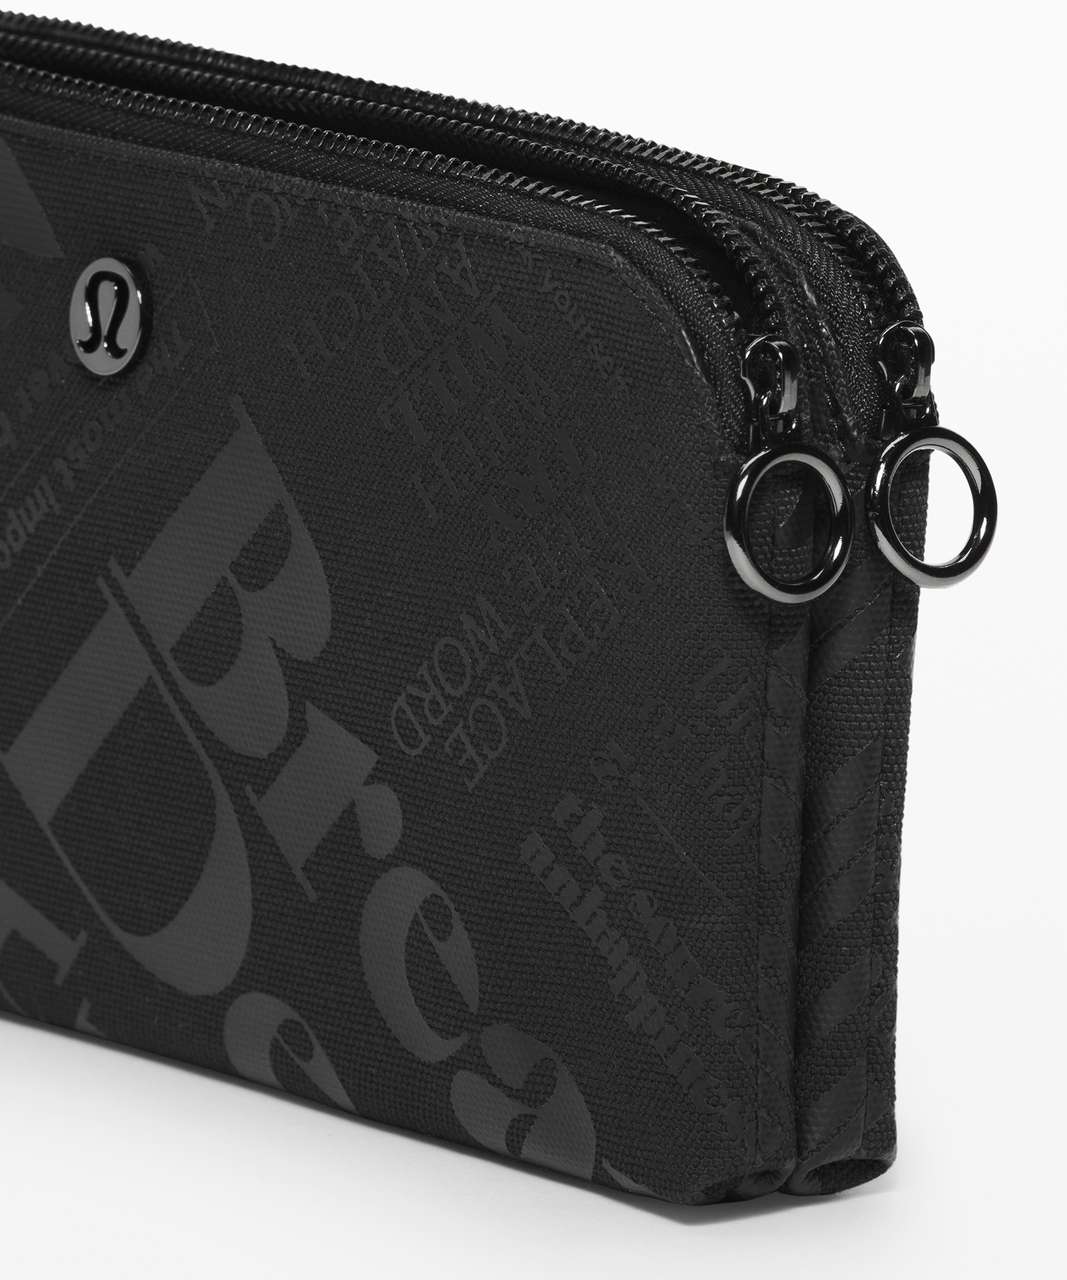 Lululemon Now and Always Pouch - Black / TRANSPARENT